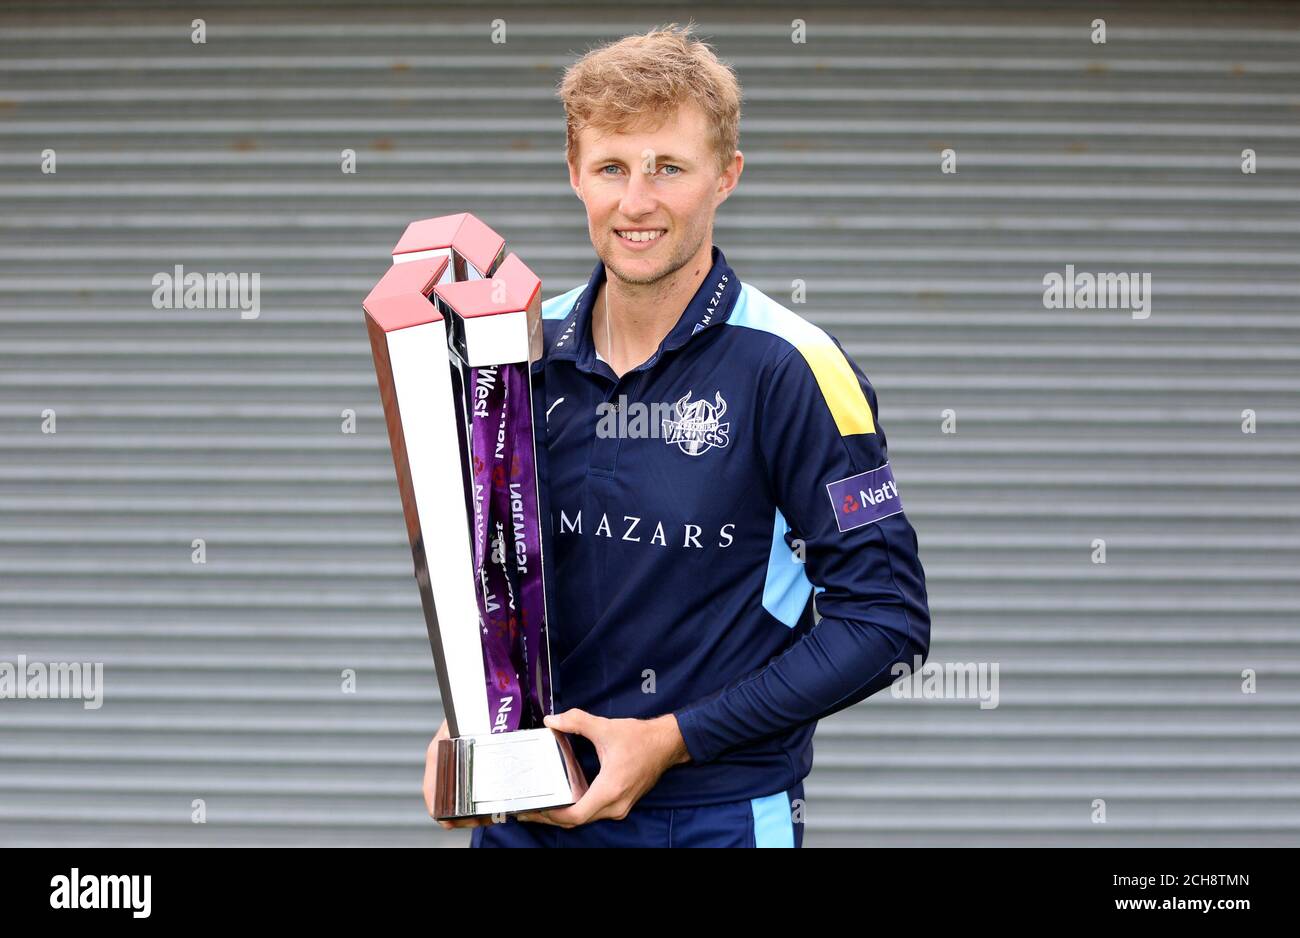 Joe Root poses with the Natwest T20 blast trophy during the T20 Blast Launch at Loughborough University, Louoghborough. PRESS ASSOCIATION Photo. Picture date: Friday May 13, 2016. See PA story cricket T20. Photo credit should read: Simon Cooper/PA Wire. RESTRICTIONS: Editorial use only. No commercial use without prior written consent of the ECB. Still image use only. No moving images to emulate broadcast. No removing or obscuring of sponsor logos. Call +44 (0)1158 447447 for further information. Stock Photo